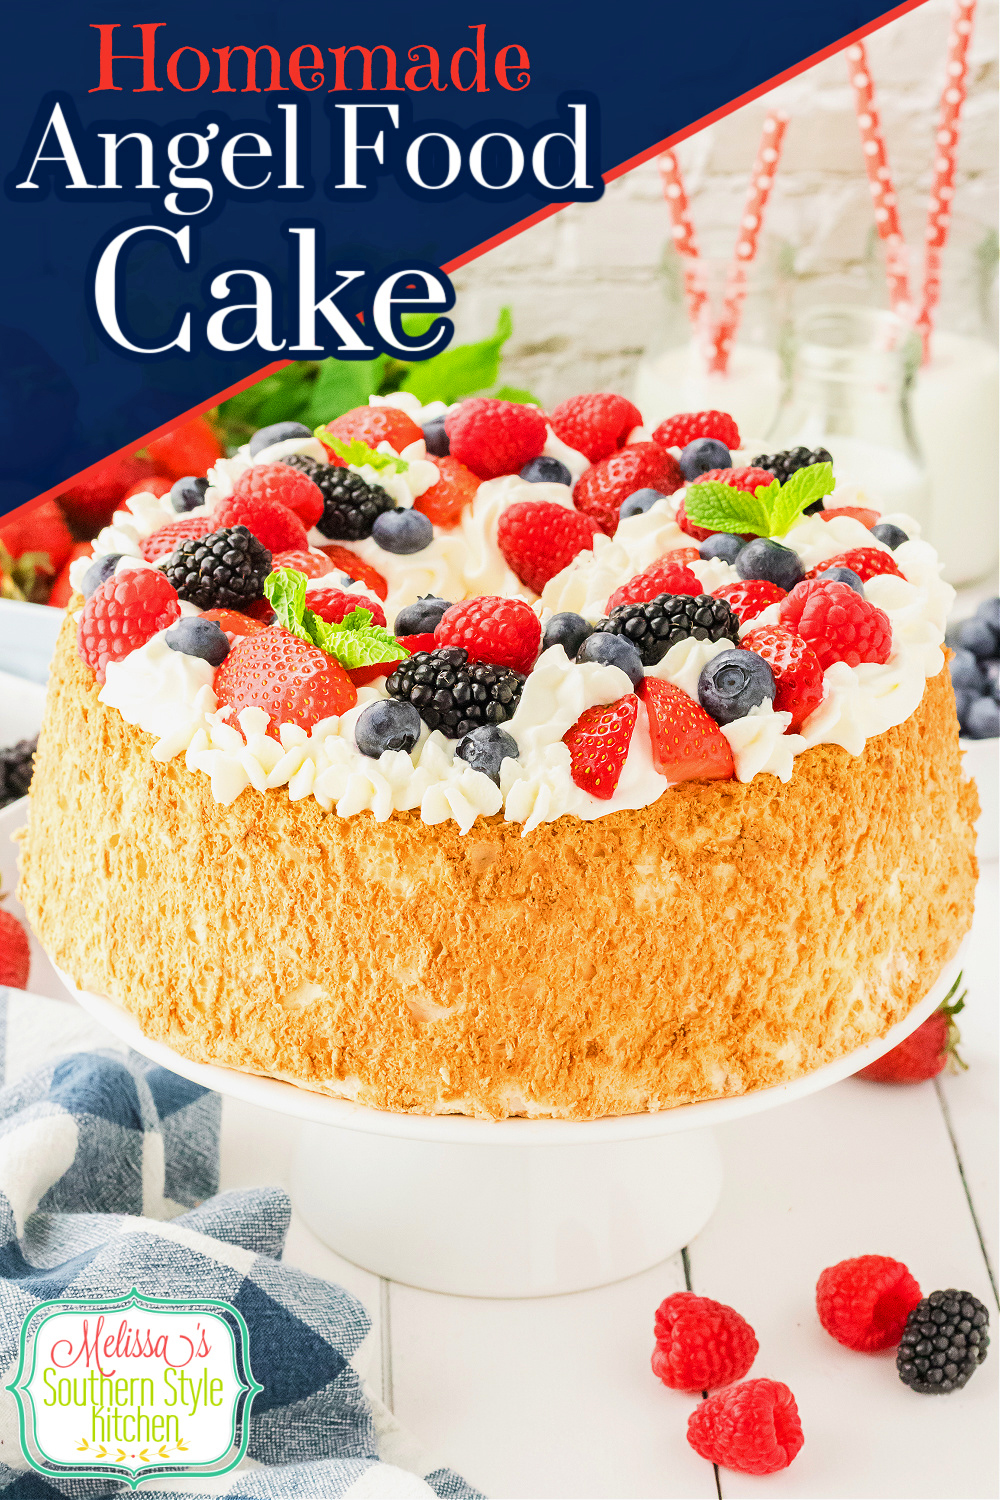 This fluffy Angel Food Cake makes a delightful dessert year-round! #angelfoodcake #cakerecipes #easydessertrecipes #angelfoodrecipe #southerncakes #dessertrecipes #fatfree